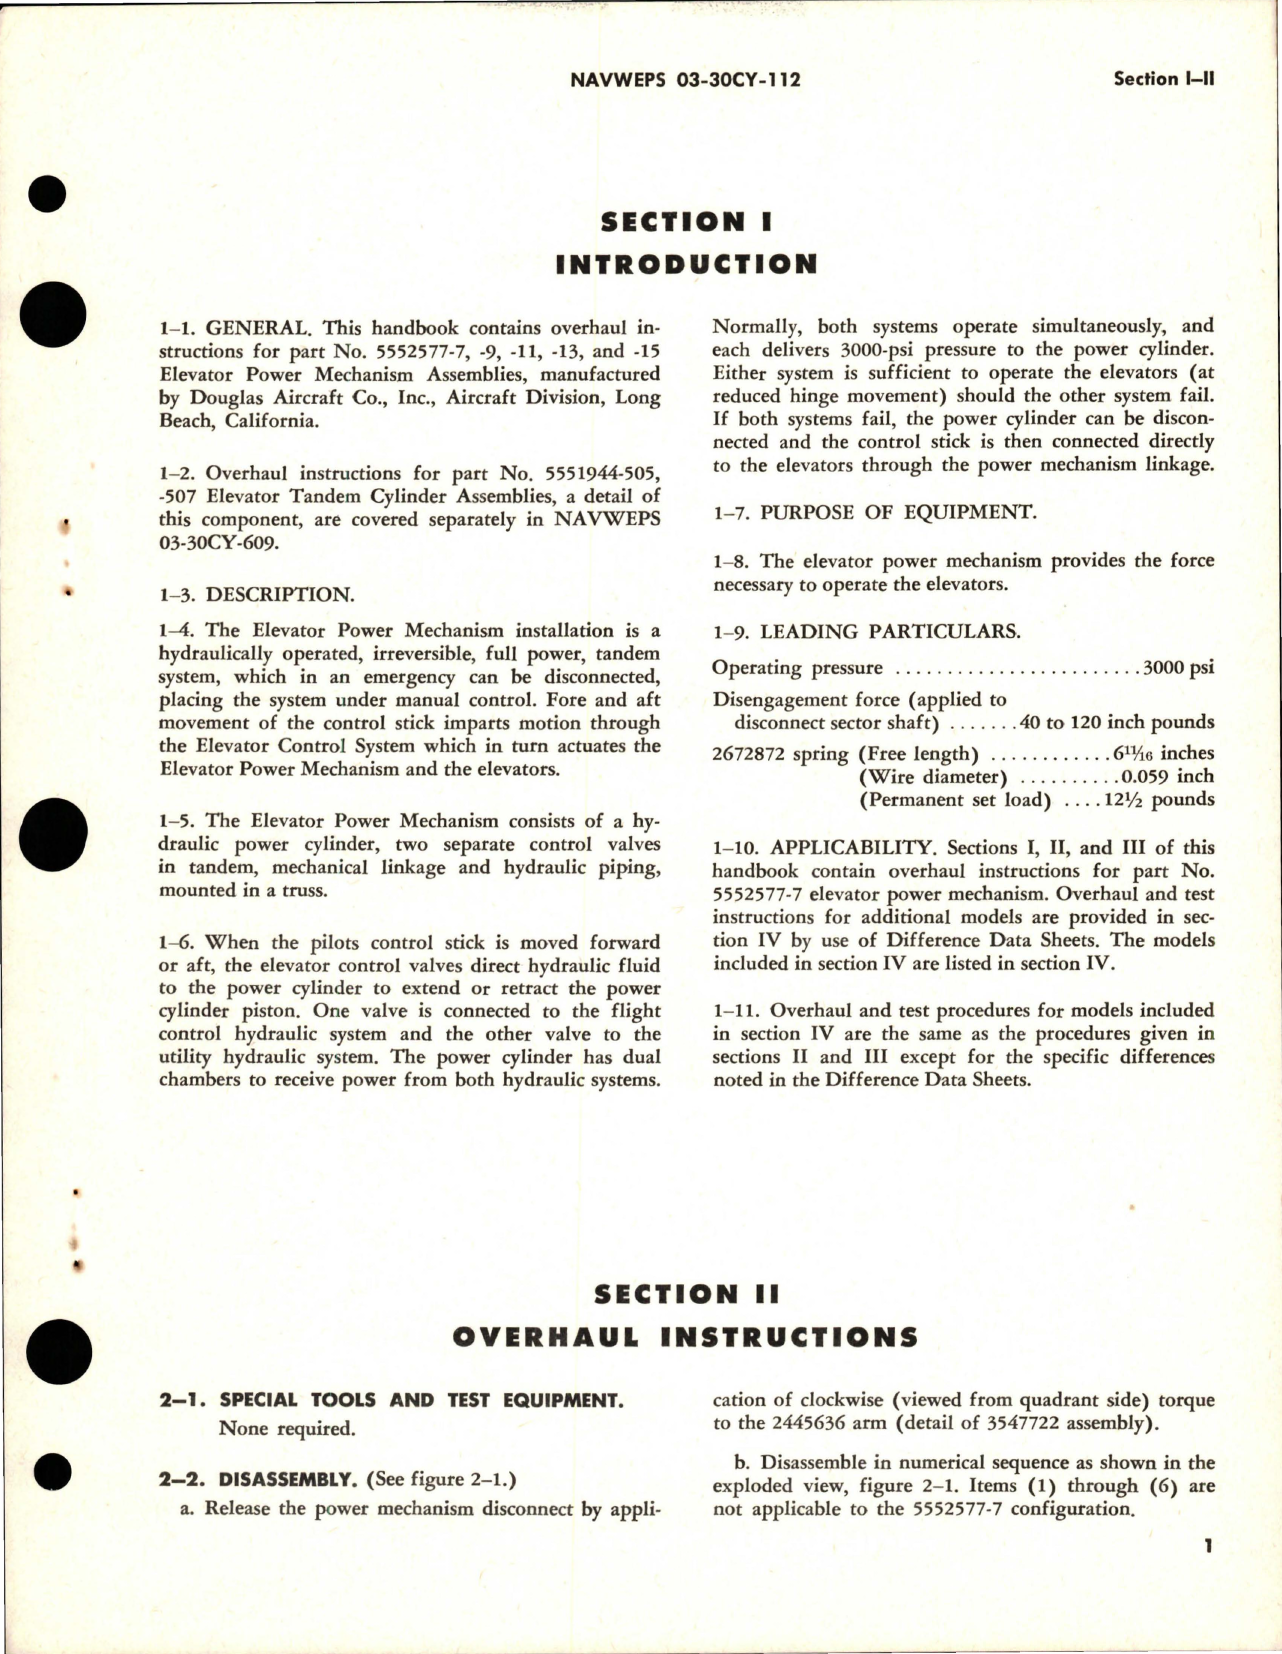 Sample page 5 from AirCorps Library document: Overhaul Instructions for Elevator Tandem Control Installation Power Mechanism Assembly